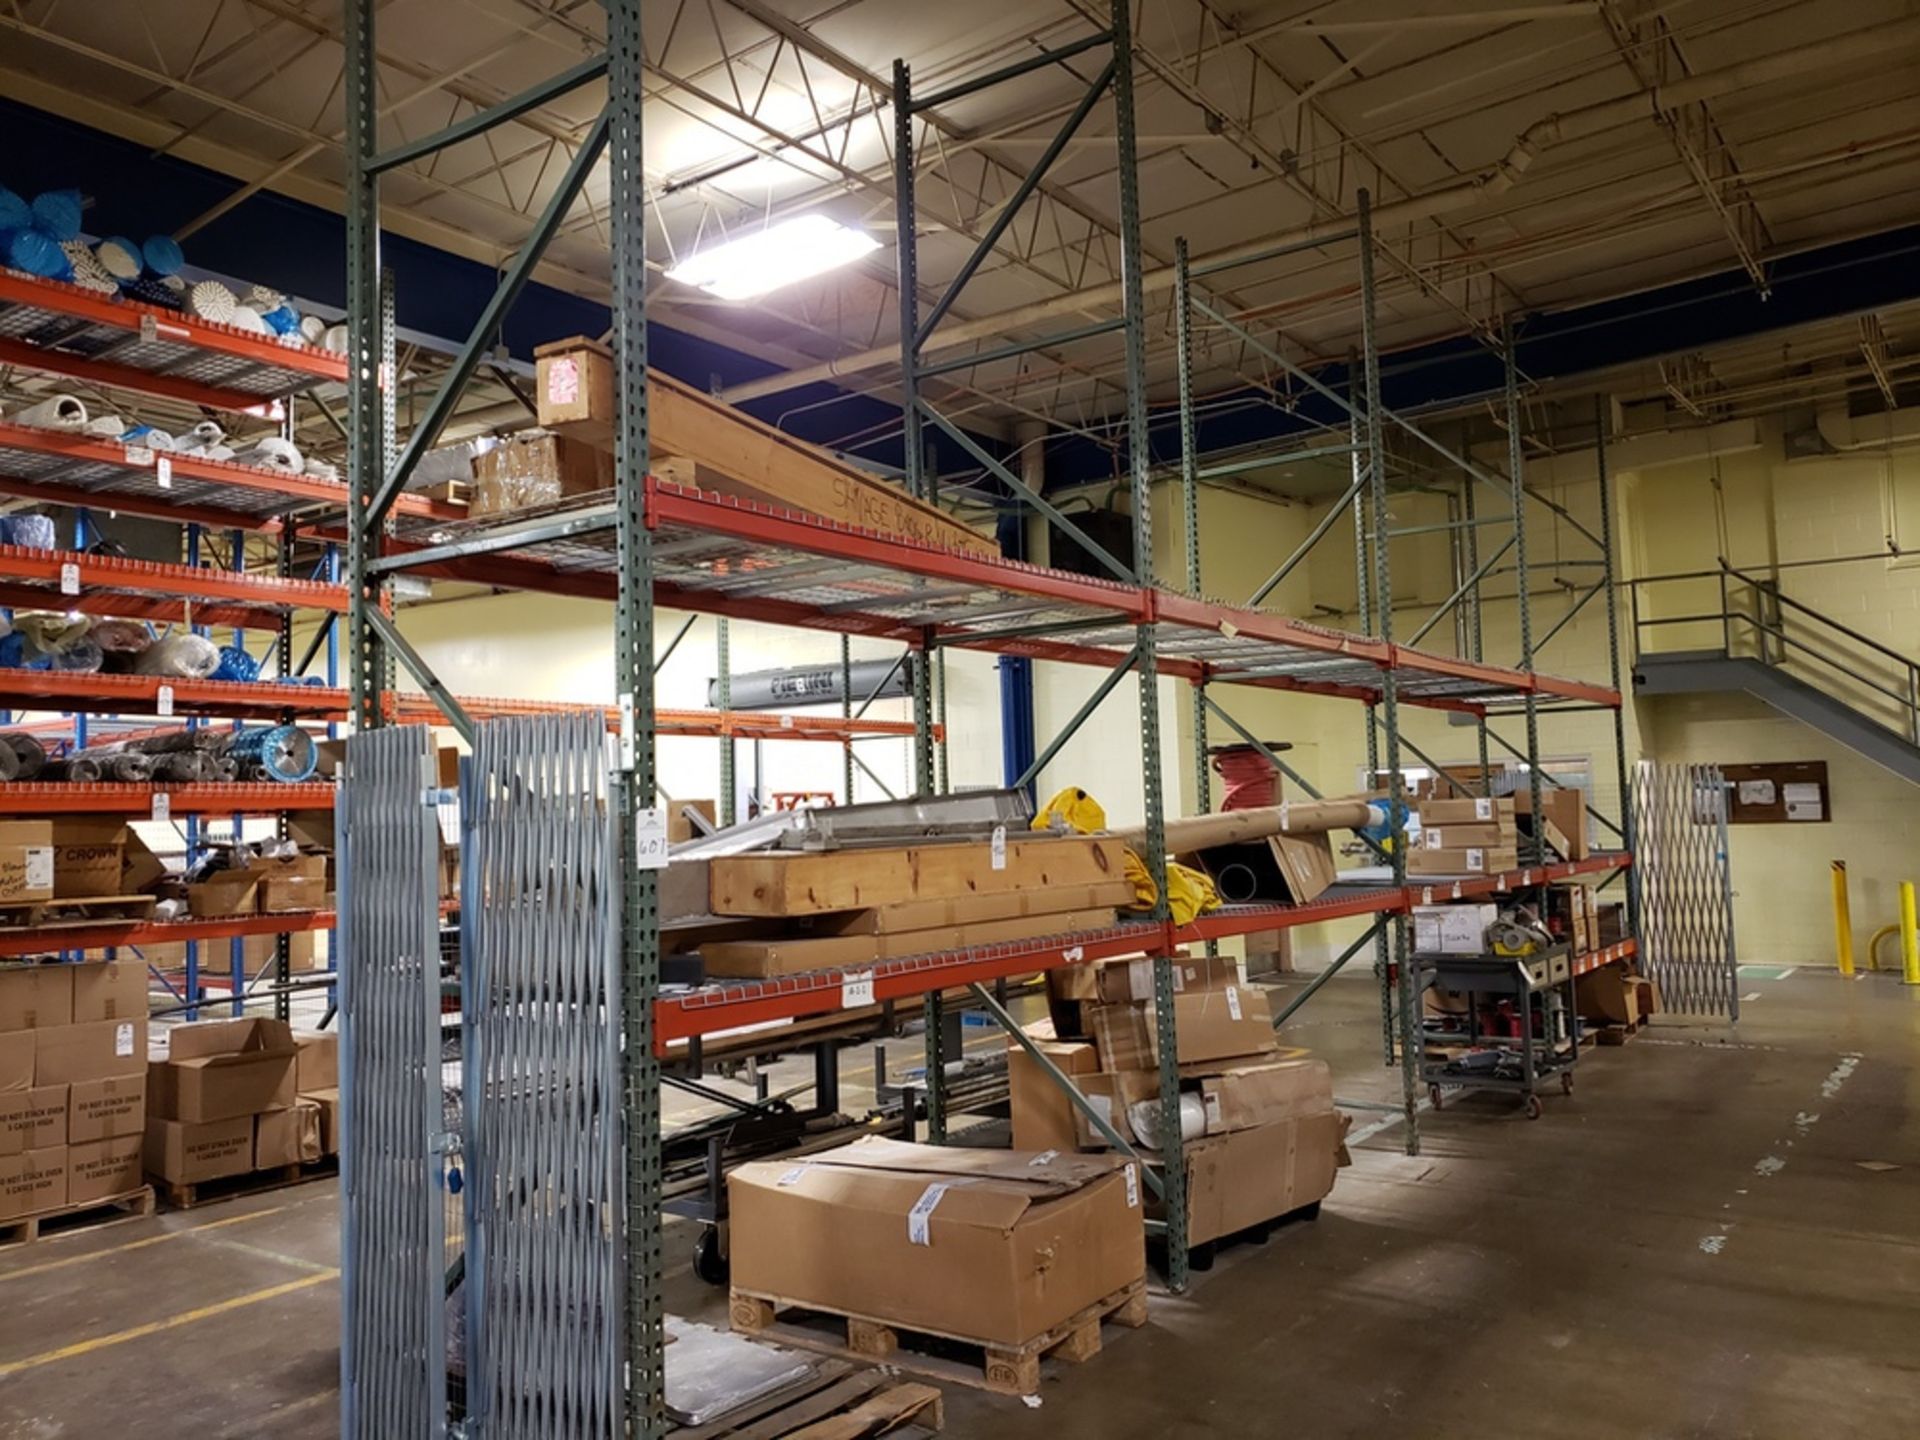 Lot of Pallet Racking, (5) 42" X 16' Uprights, (18) 8' Beams, (18) Wire Shelves | Rig Fee: $300